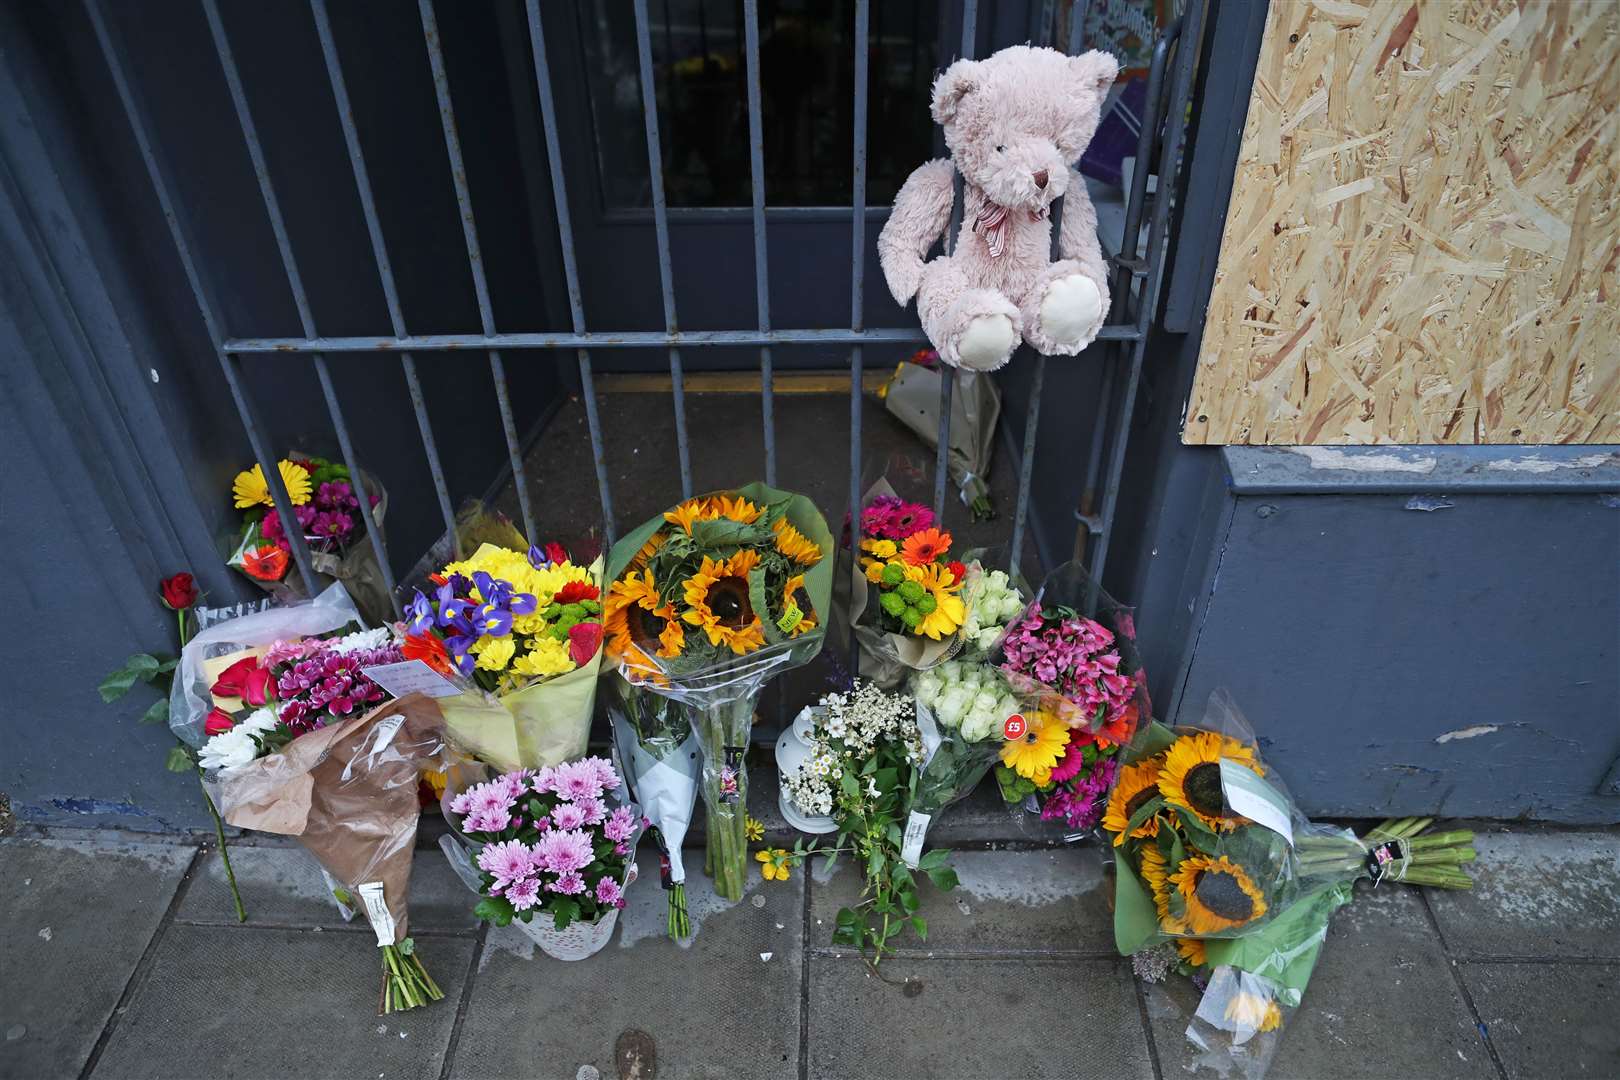 Flowers and a teddy bear were later left at the scene in tribute (Jane Barlow/PA)